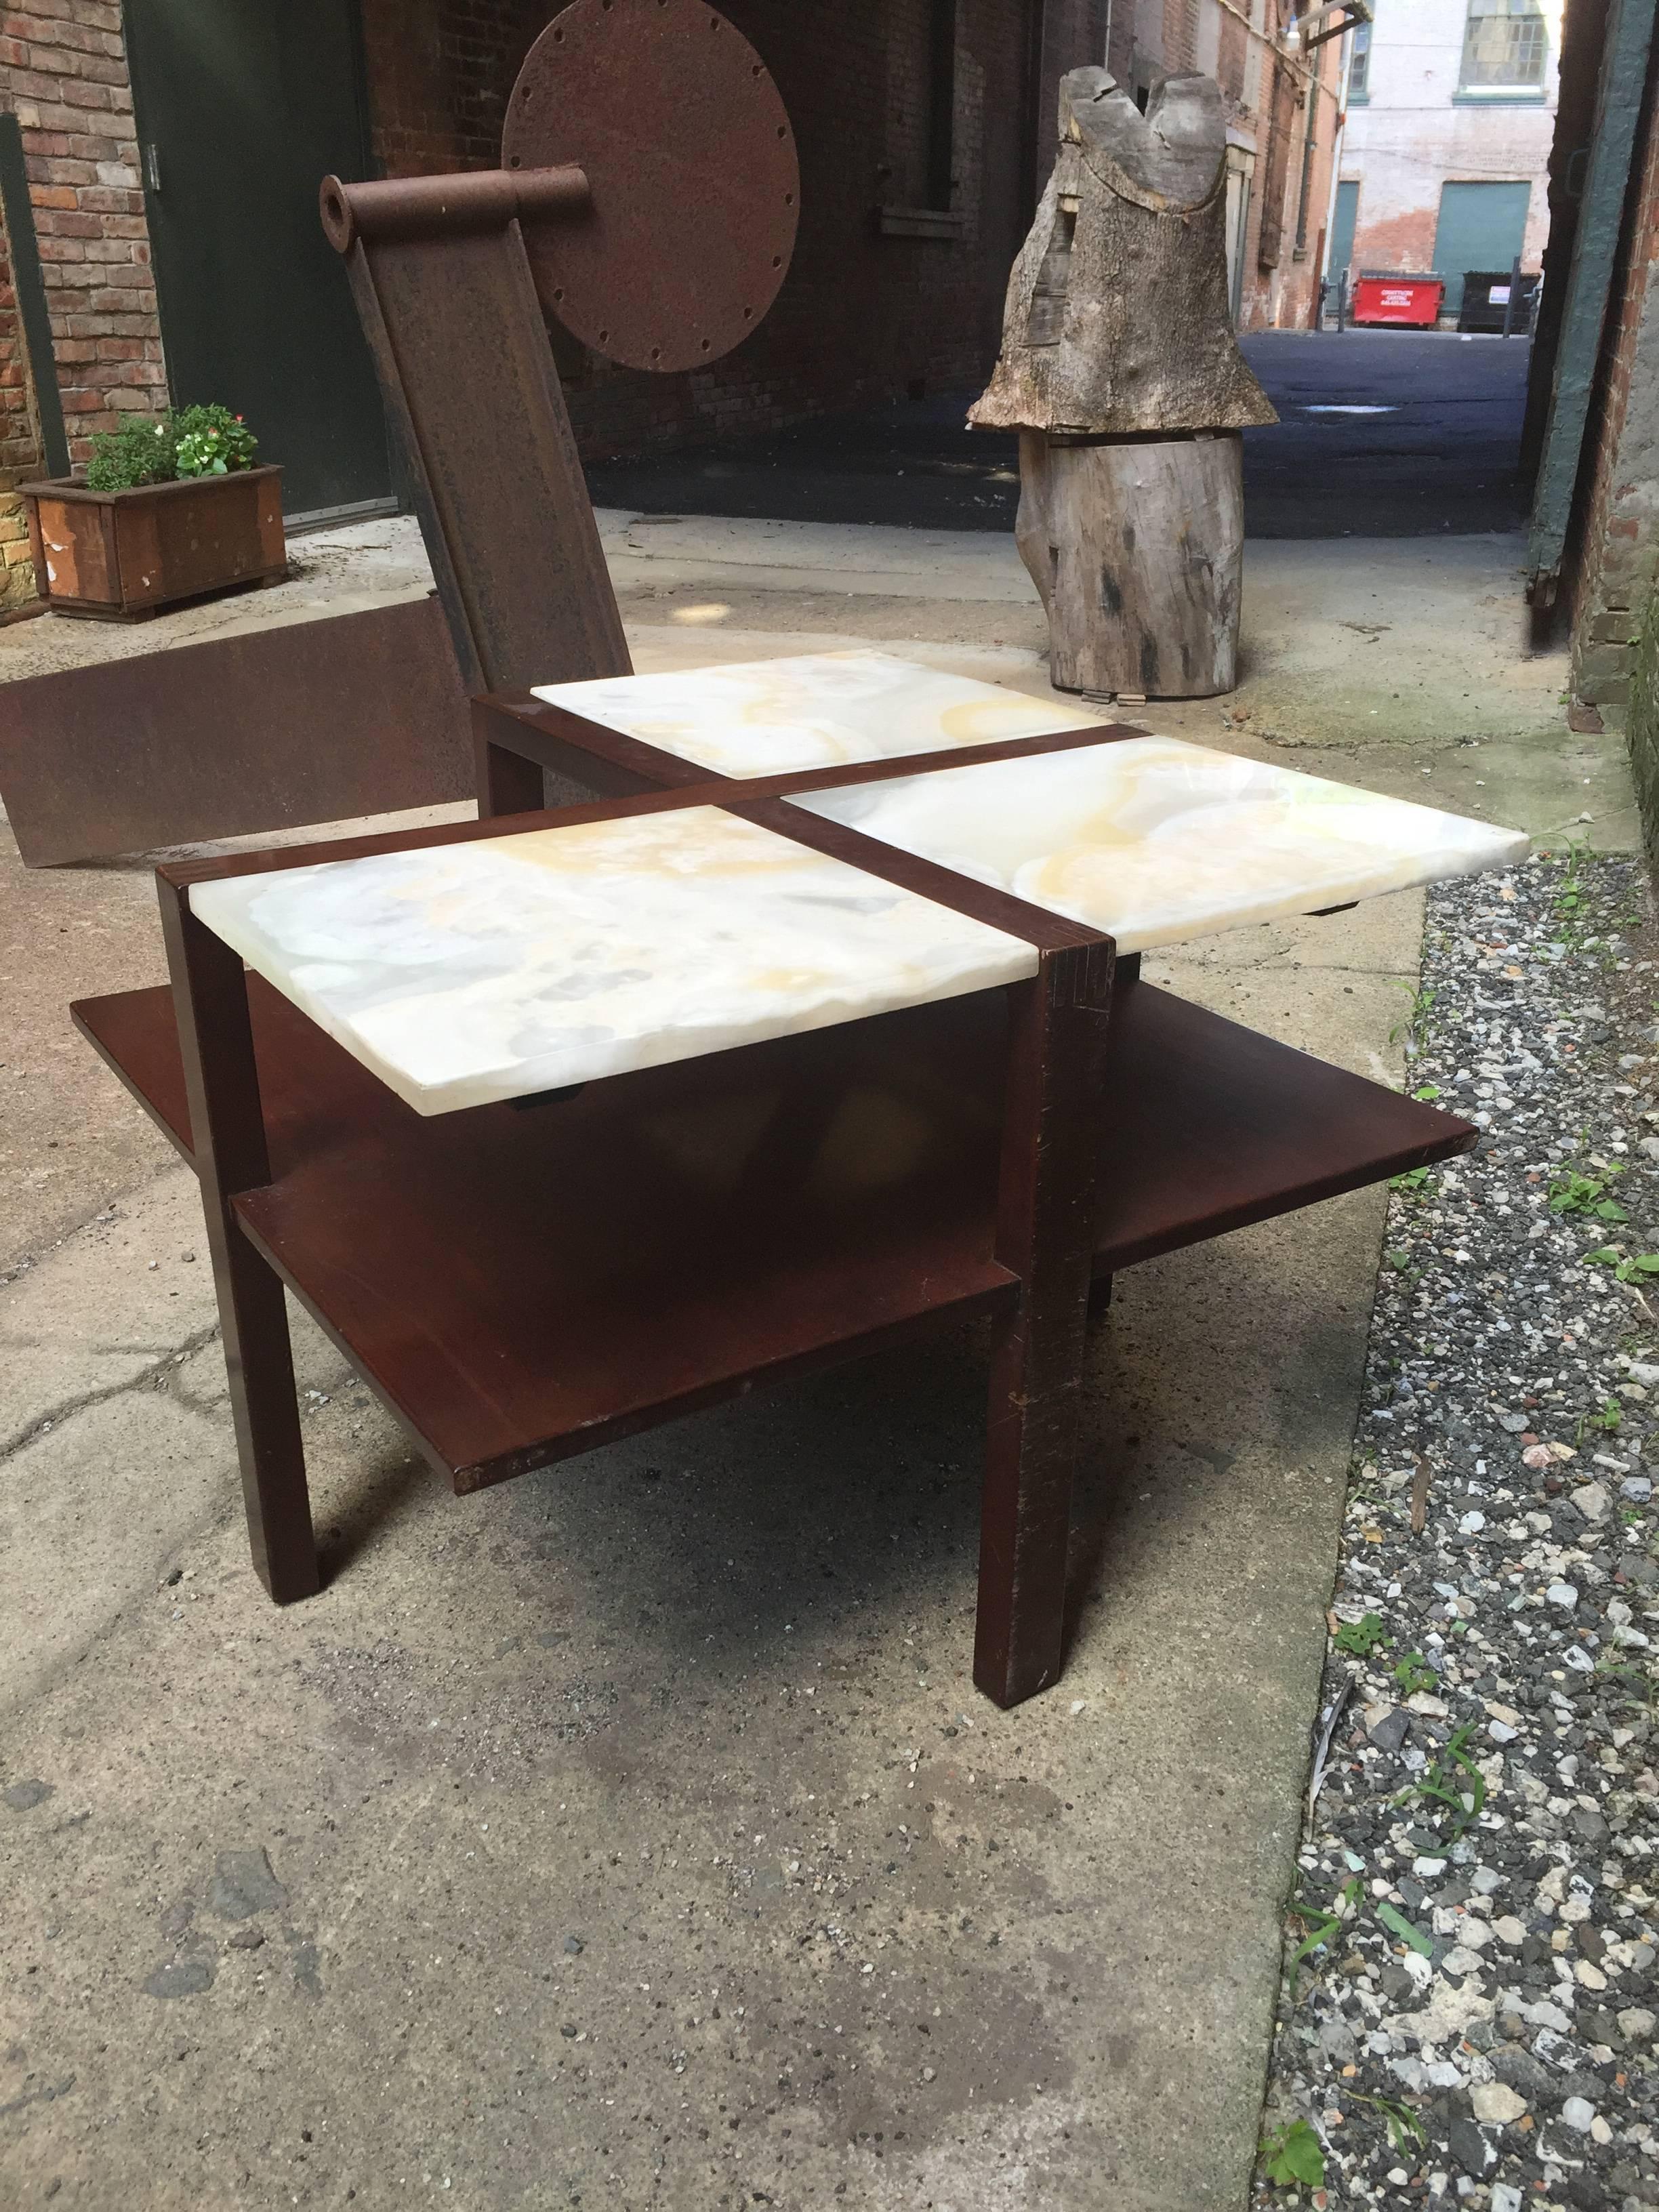 Mexican Edmund Spence Moderne Onyx and Mahogany Table